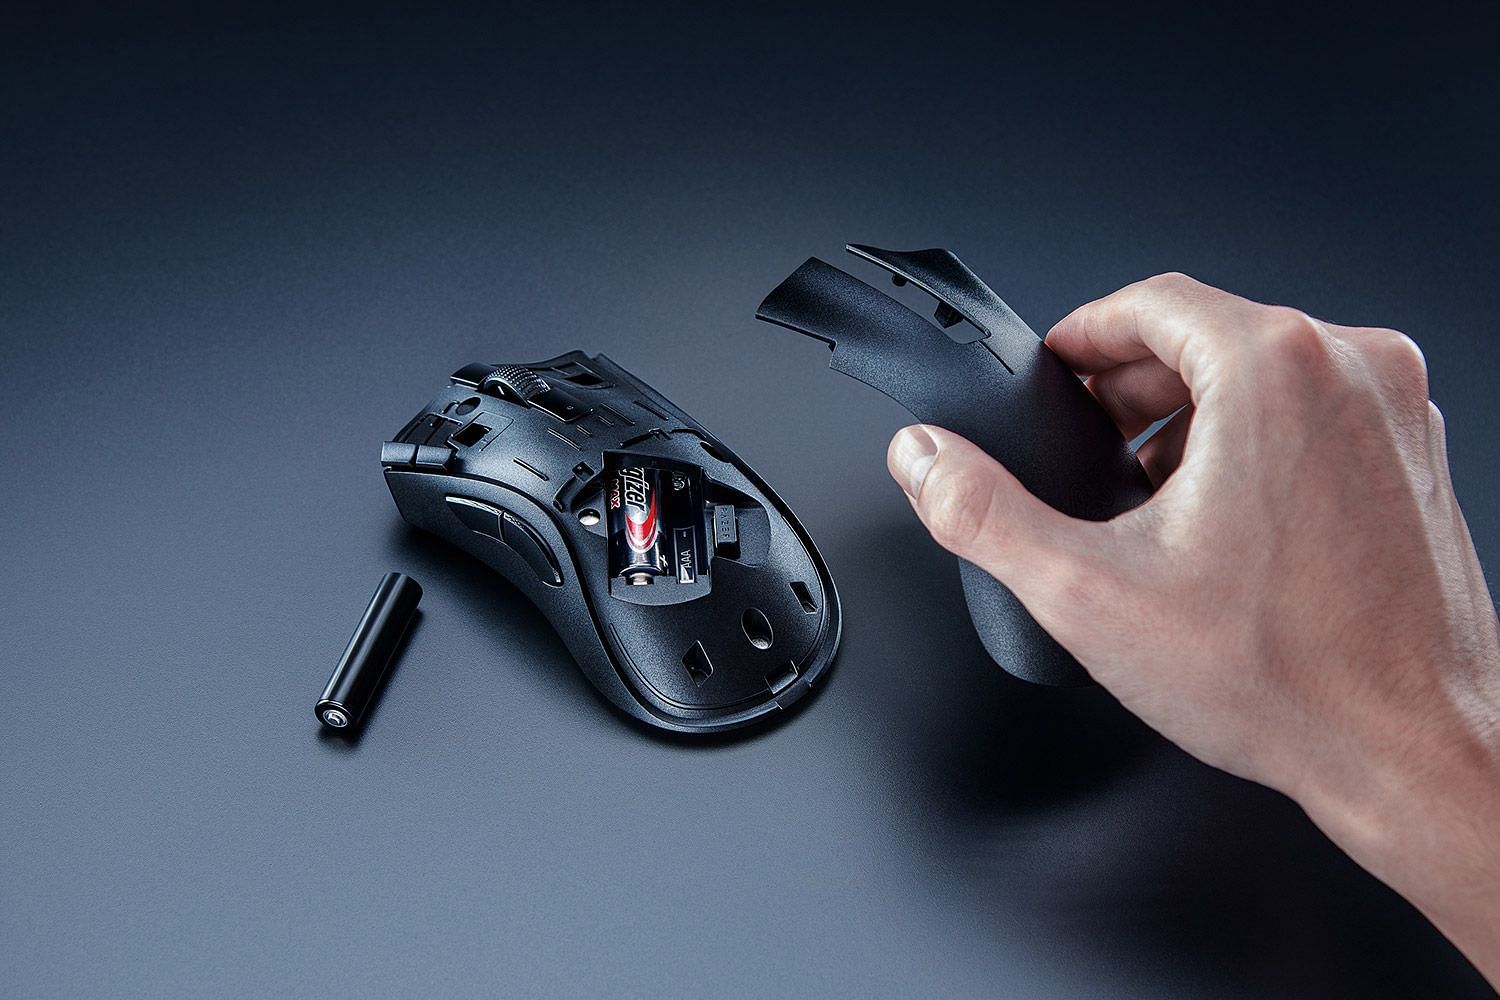 Wired vs. Wireless Mouse: Which Is Better For Gaming?